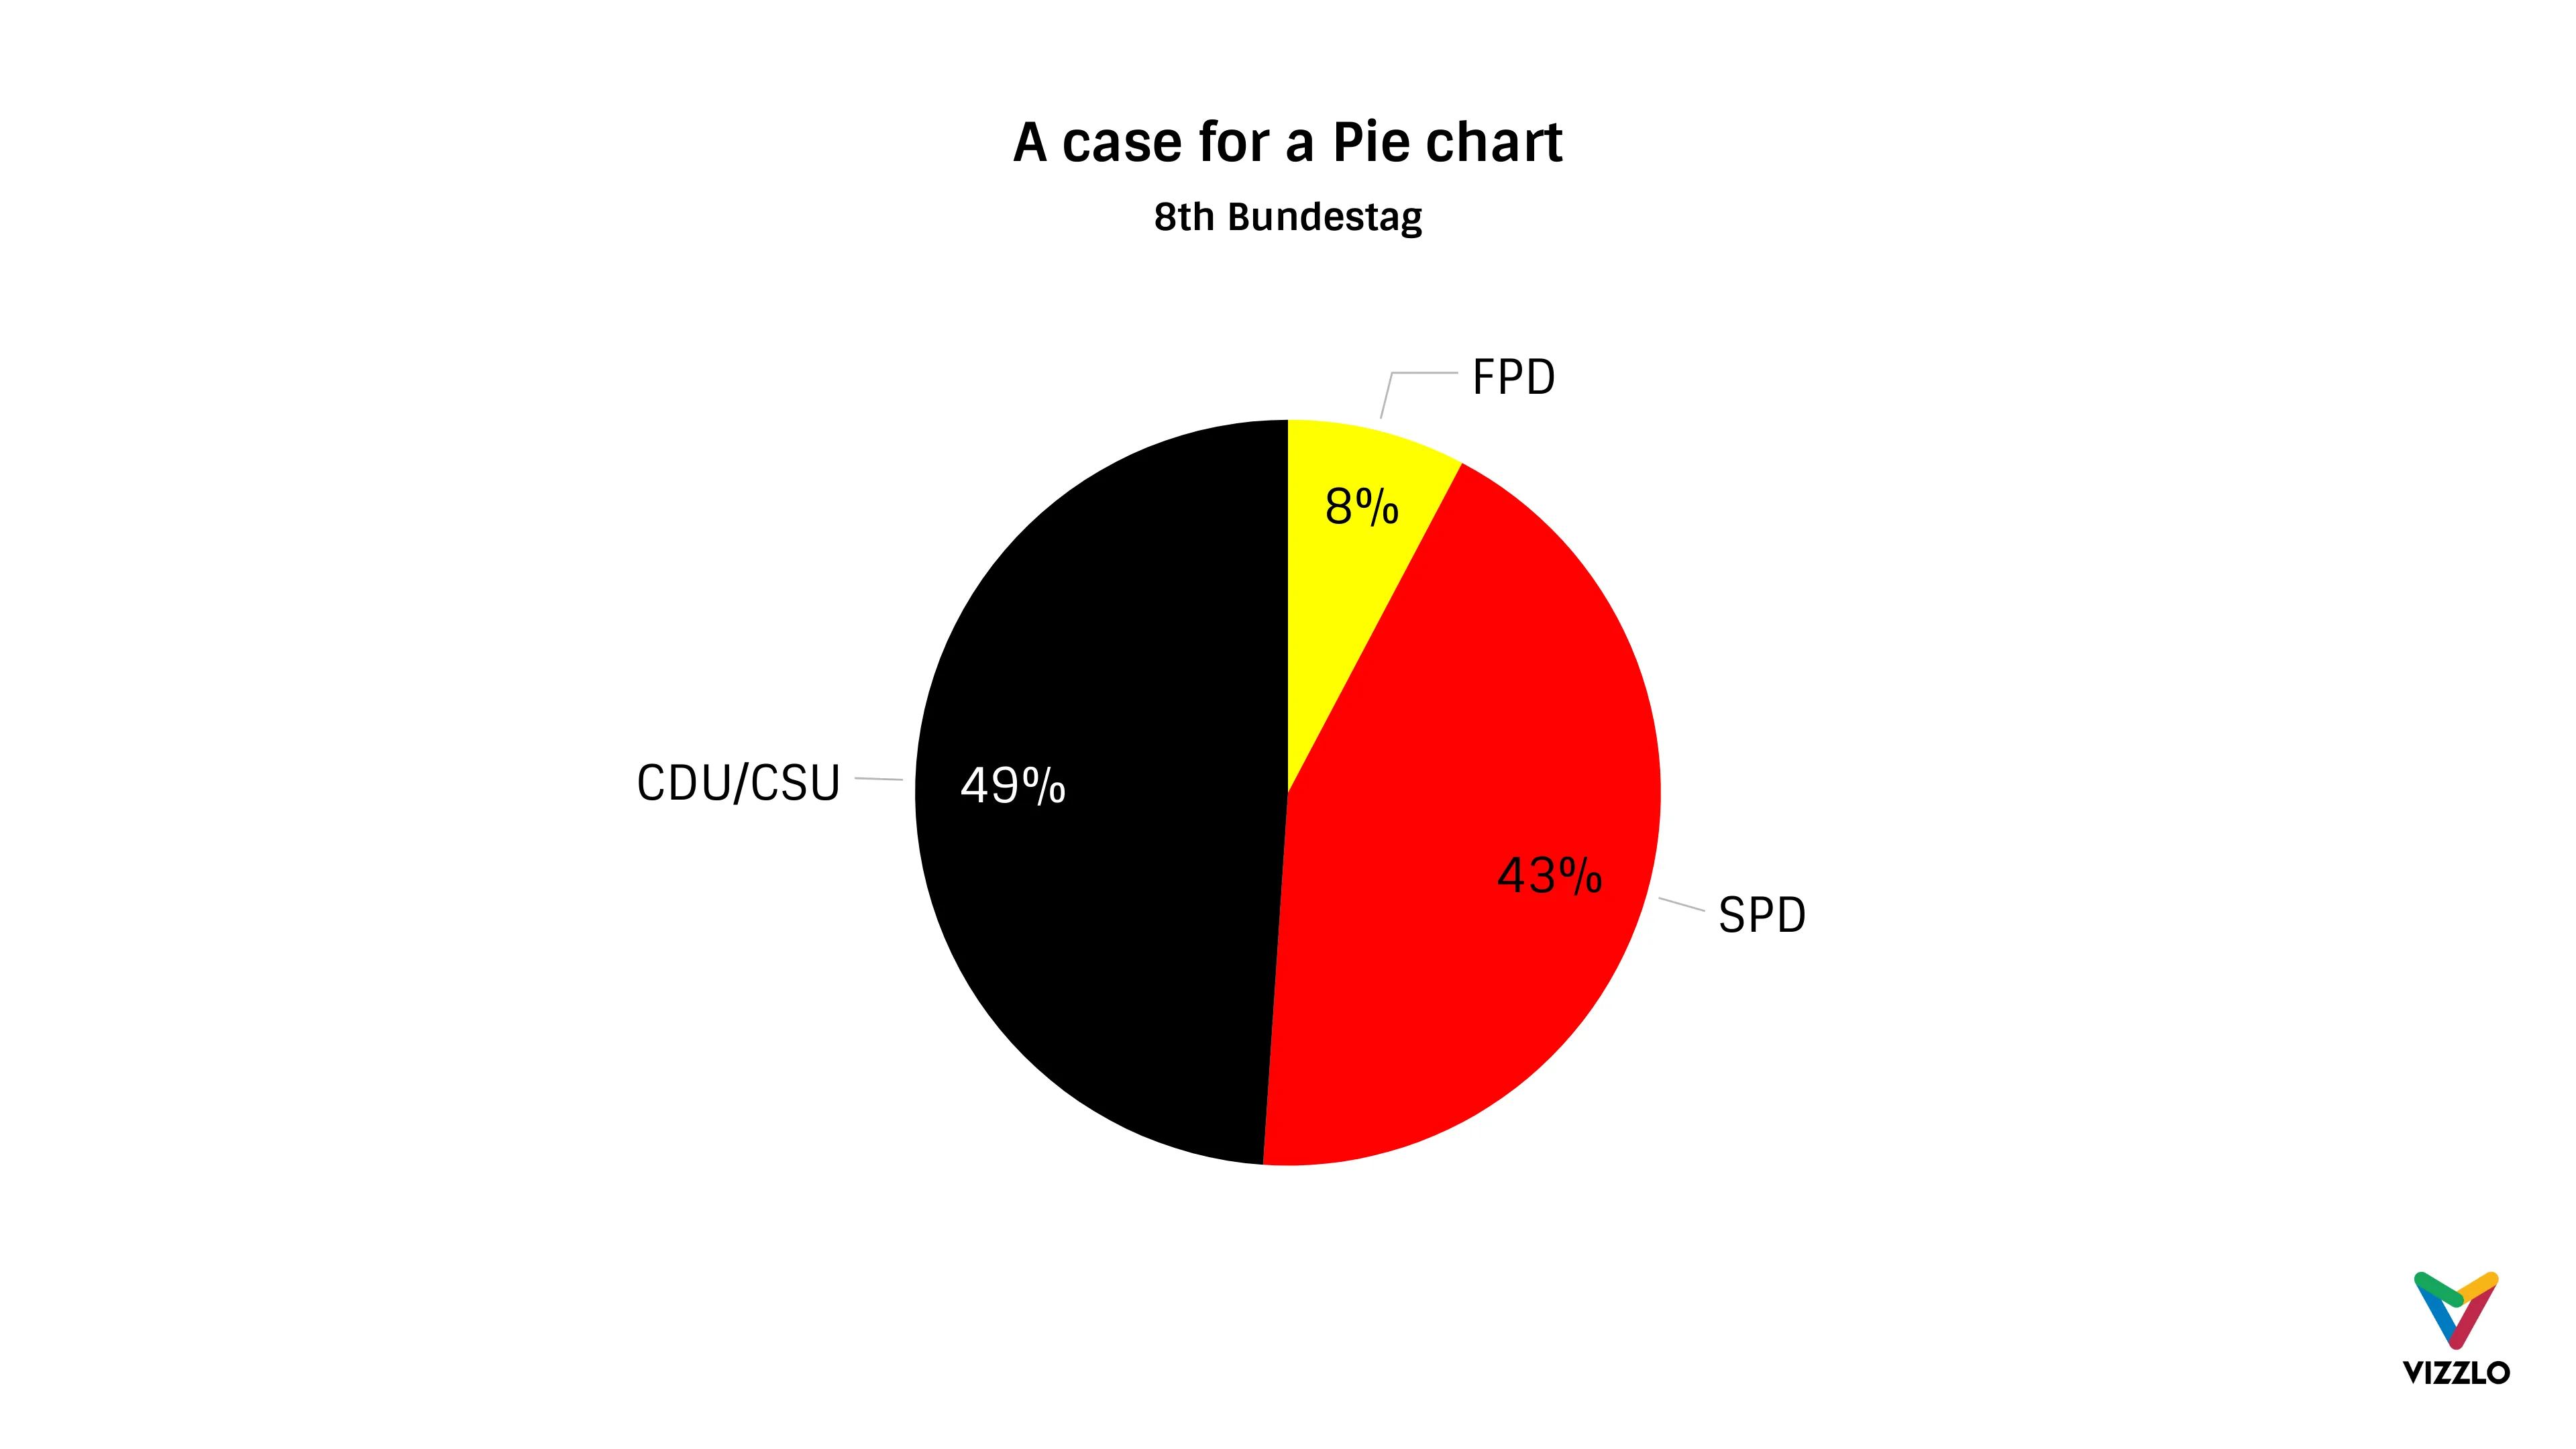 A case for a Pie chart